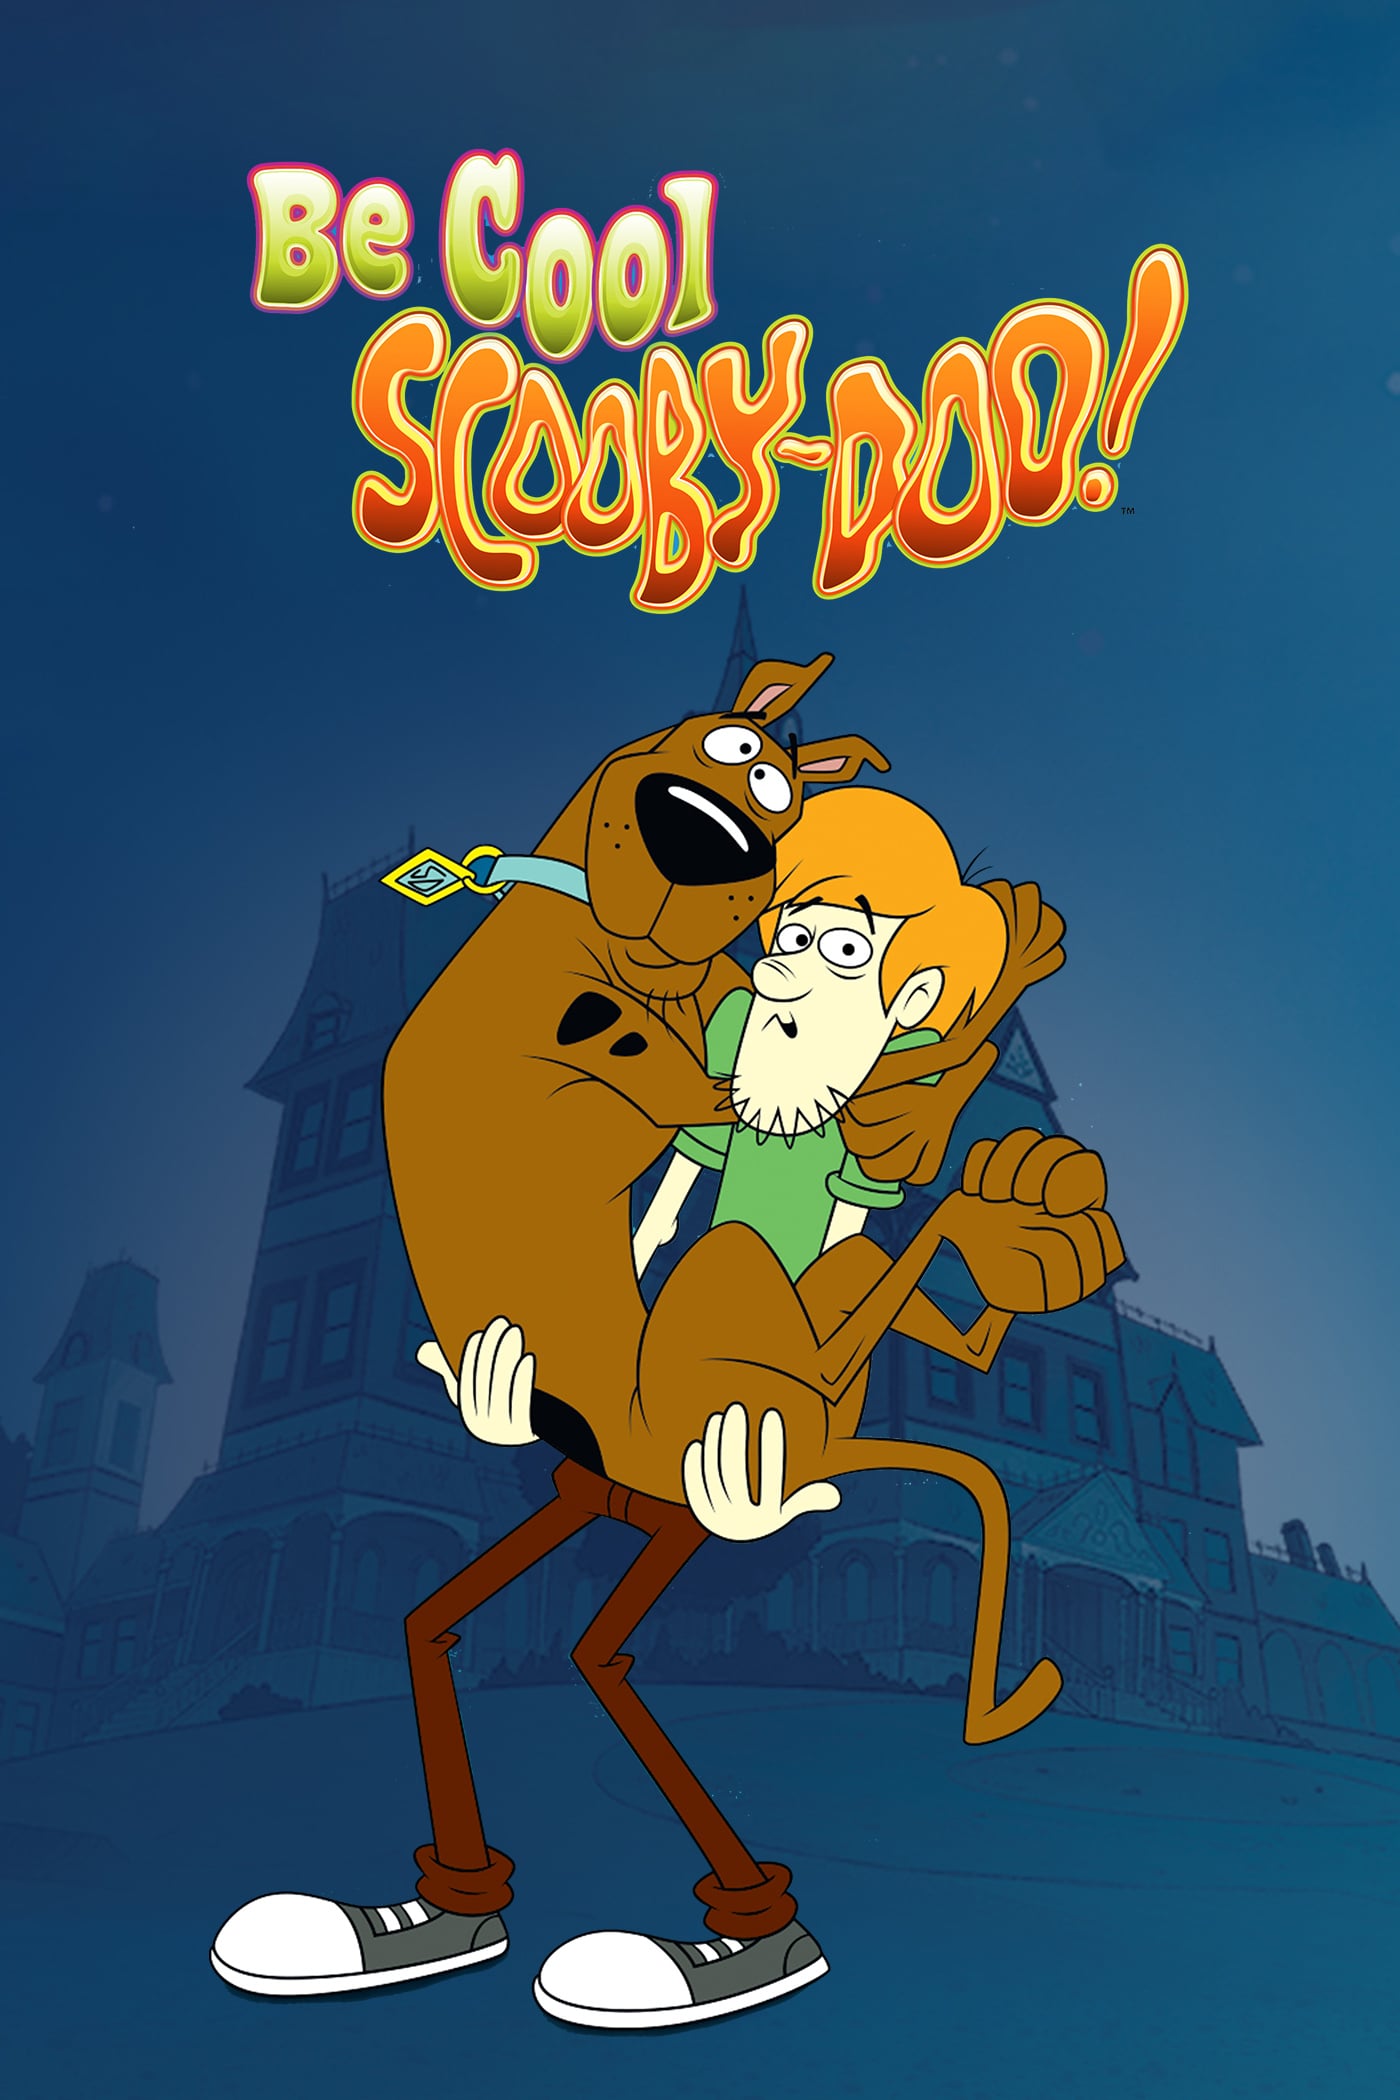 Pin by harley psycho on aes: mystery inc | Be cool scooby 